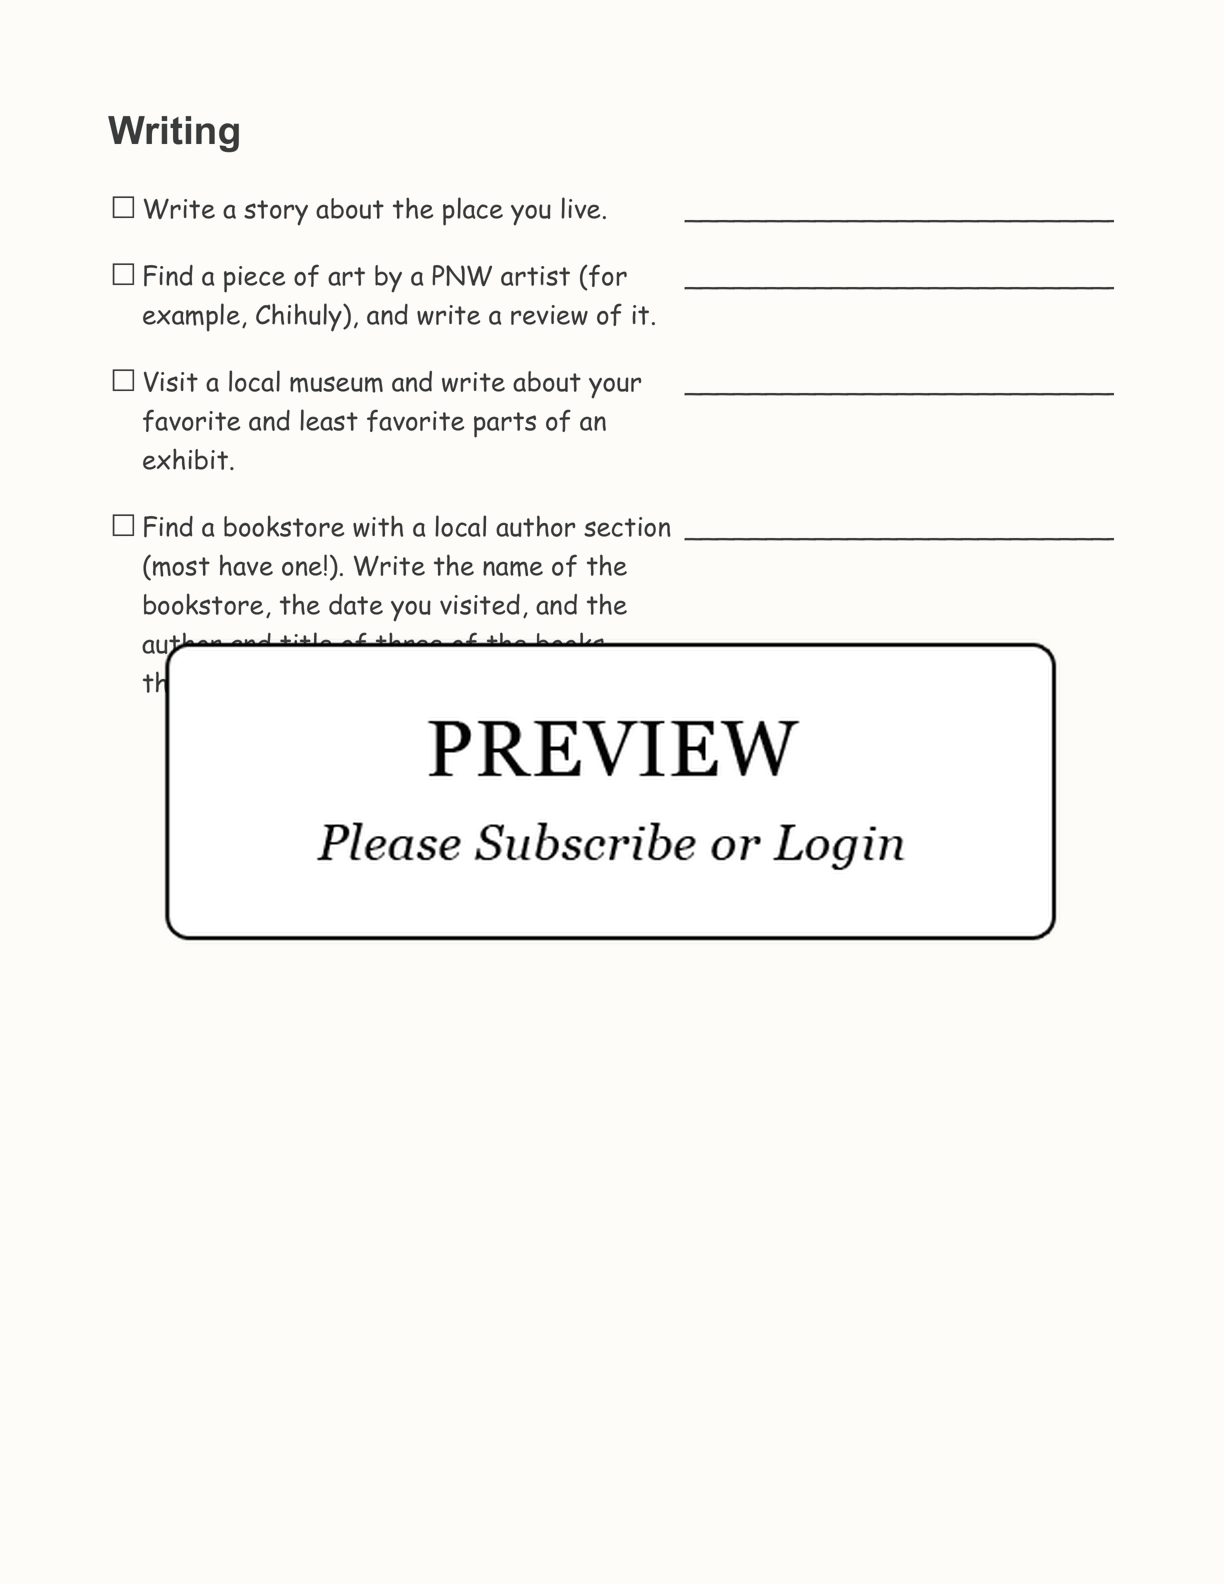 Pacific Northwest (PNW) Reading and Writing Challenge interactive printout page 2